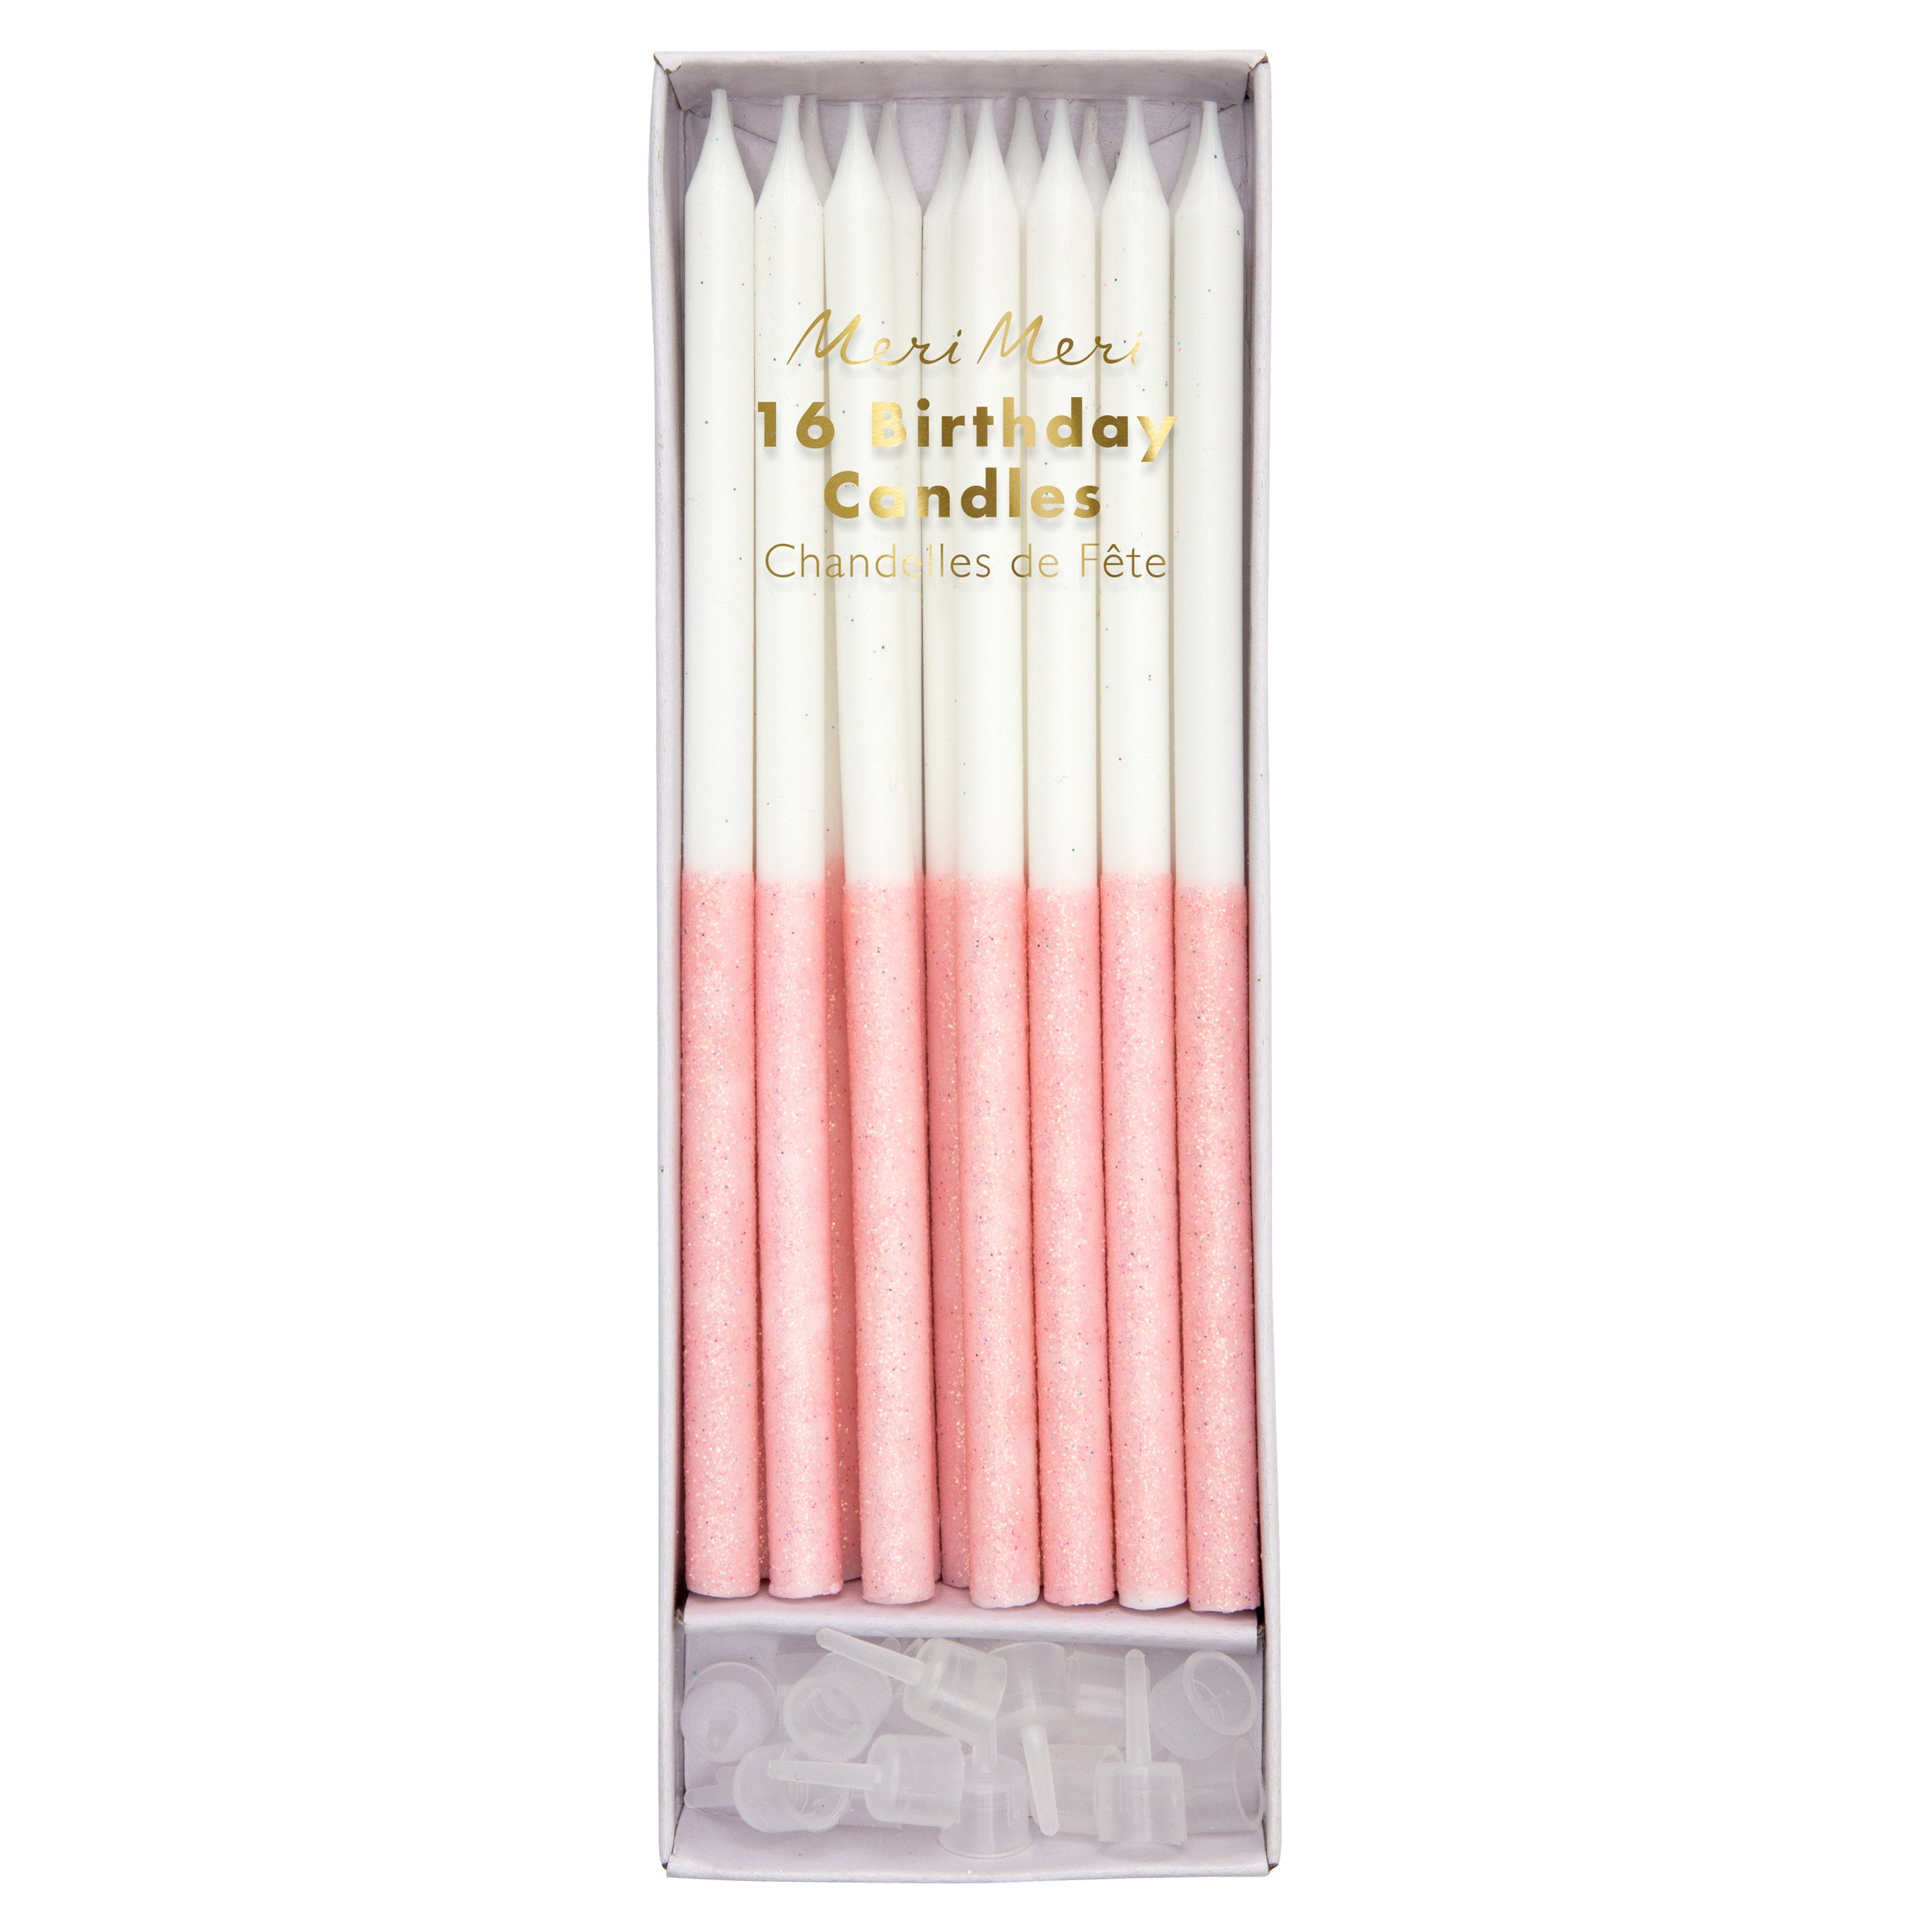 VERY PALE PINK GLITTER DIPPED CANDLES